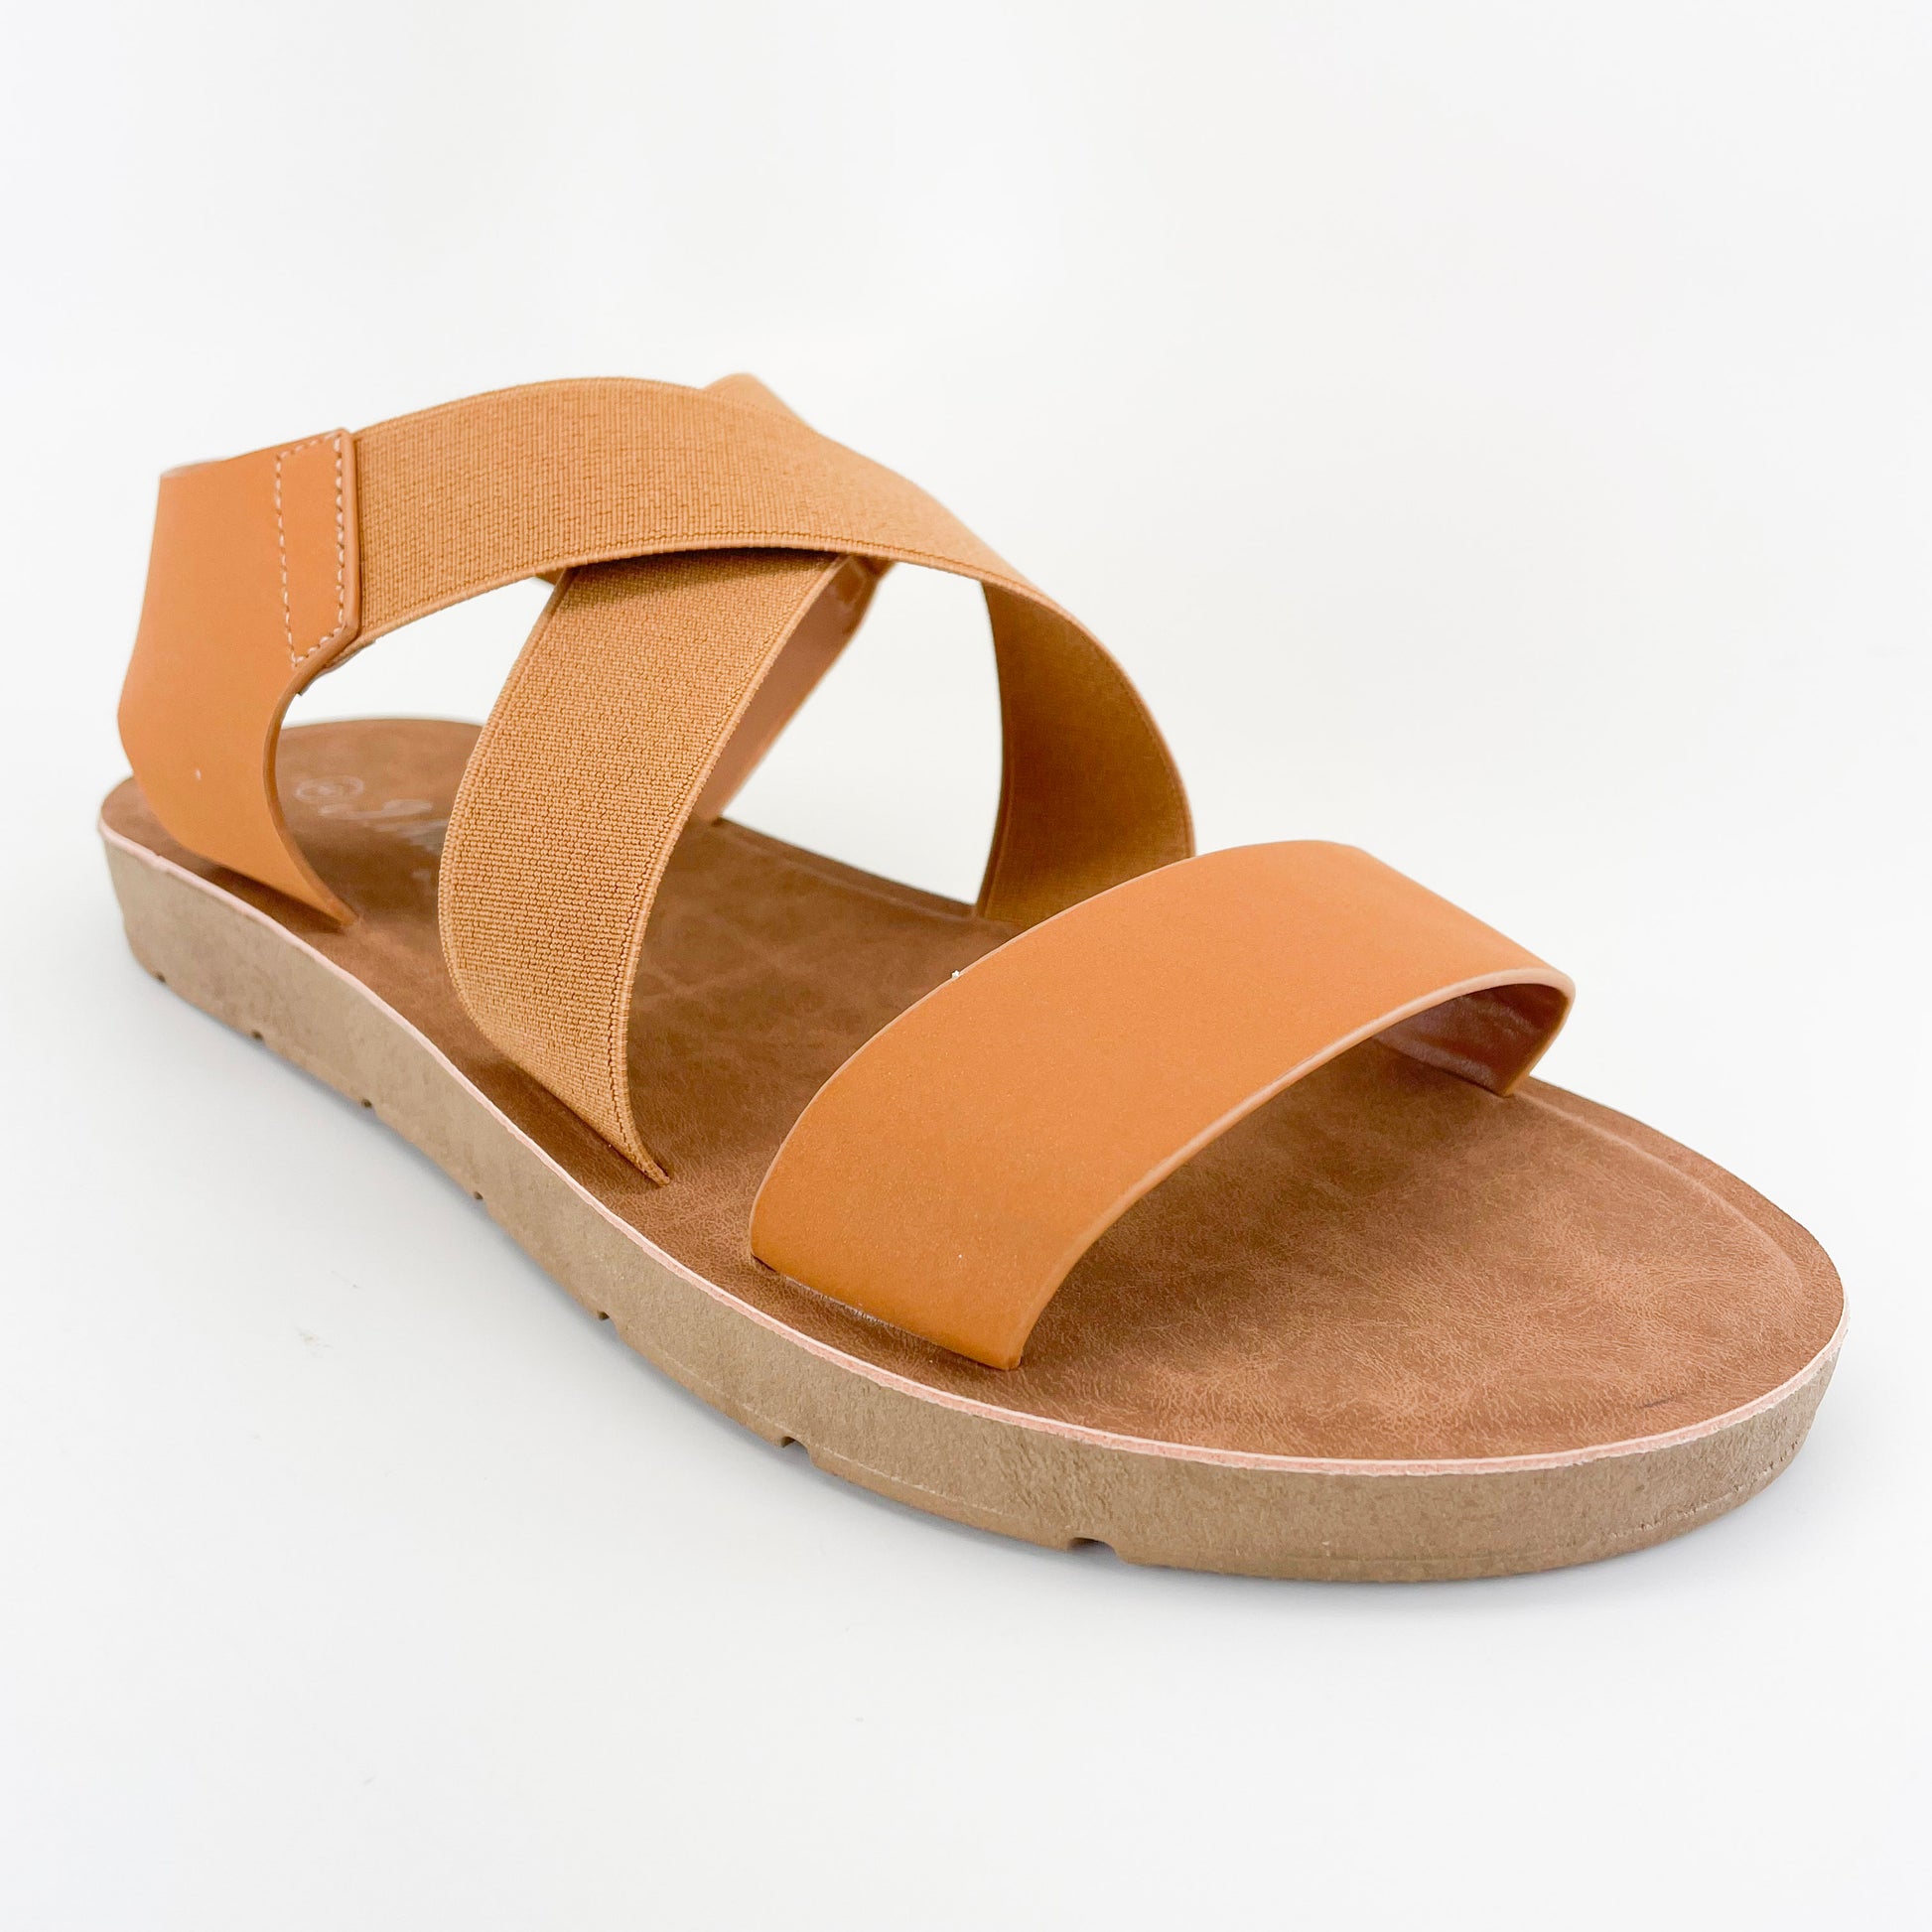 j. mark form-901 women tan sandals with stretchable criss cross straps